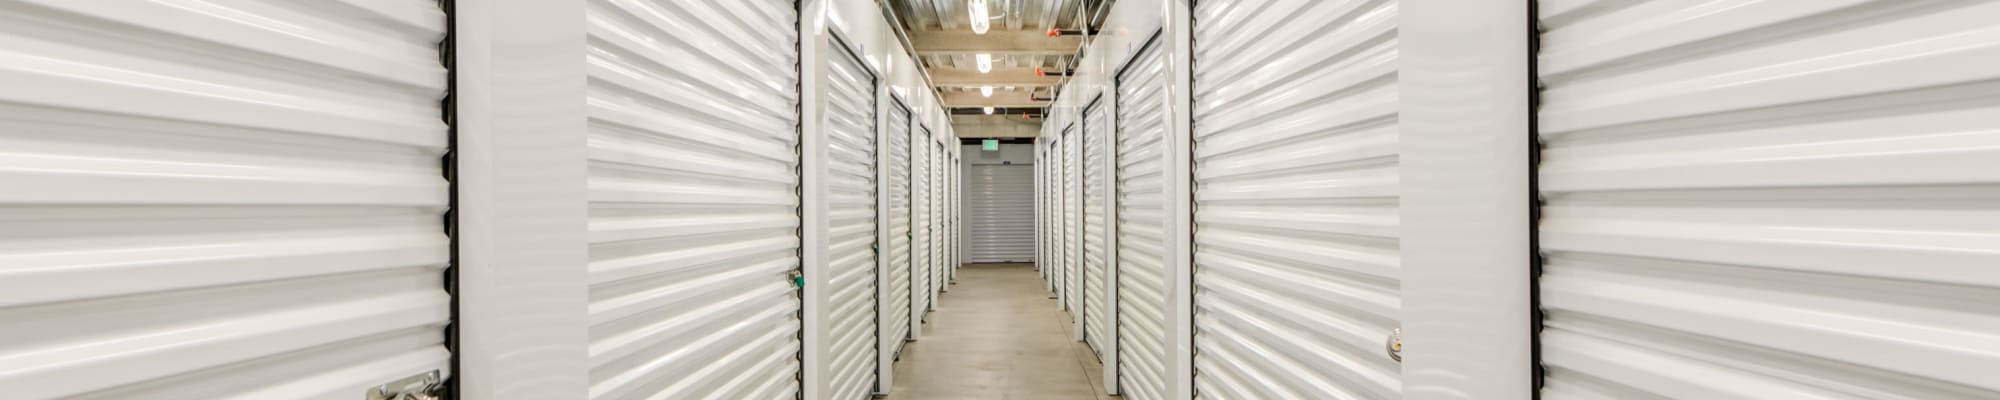 Size guide for units at Storage Etc De Soto in Chatsworth, California